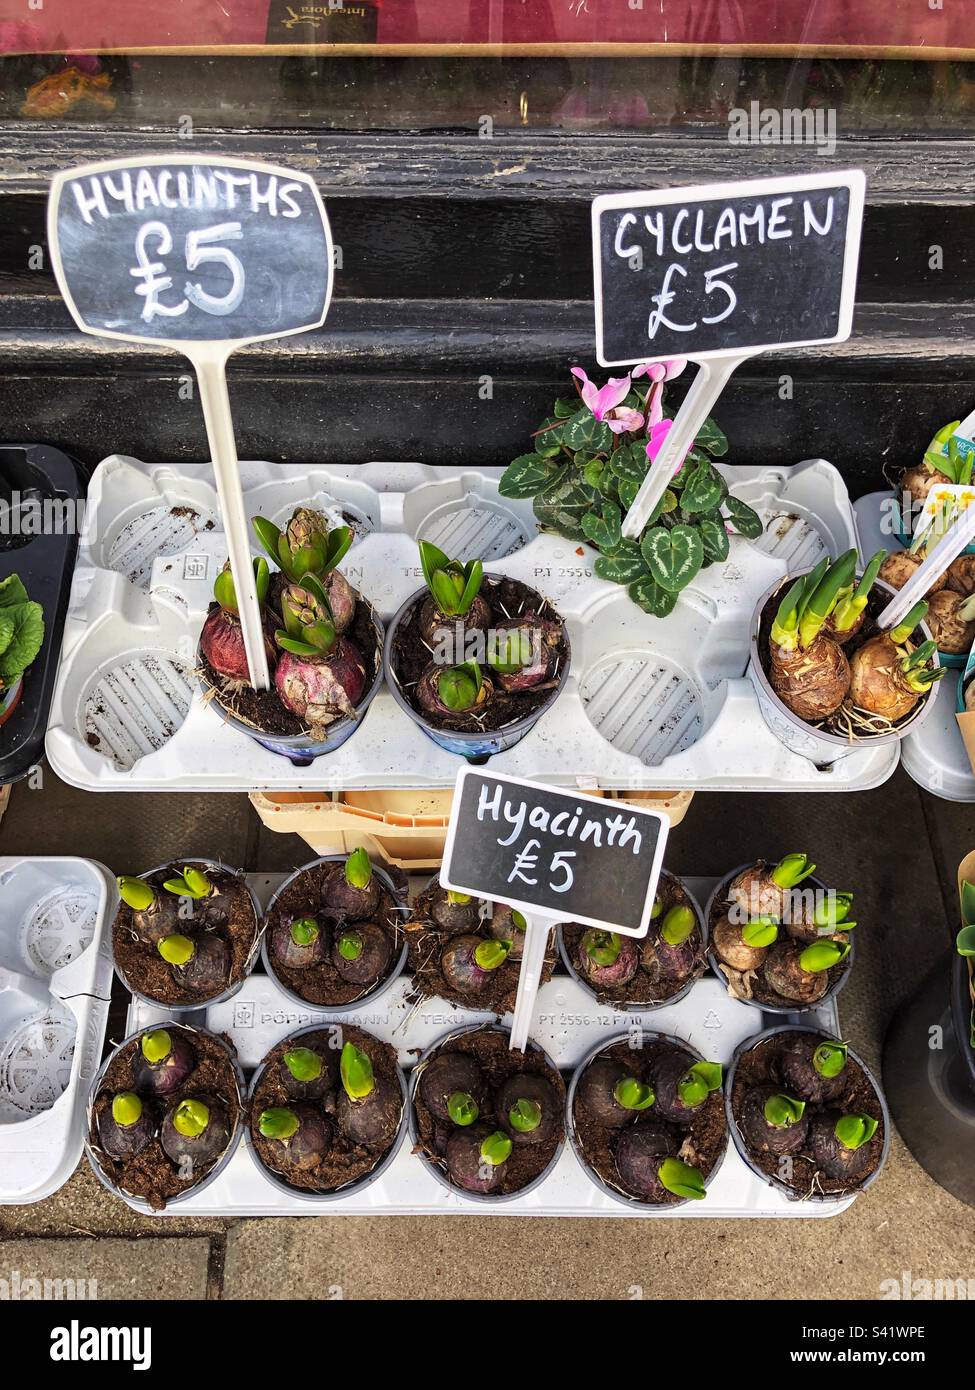 Sprouting Spring shoots of Hyacinth bulbs and leafy pink Cyclamen flowers in pots for sale at florist Stock Photo